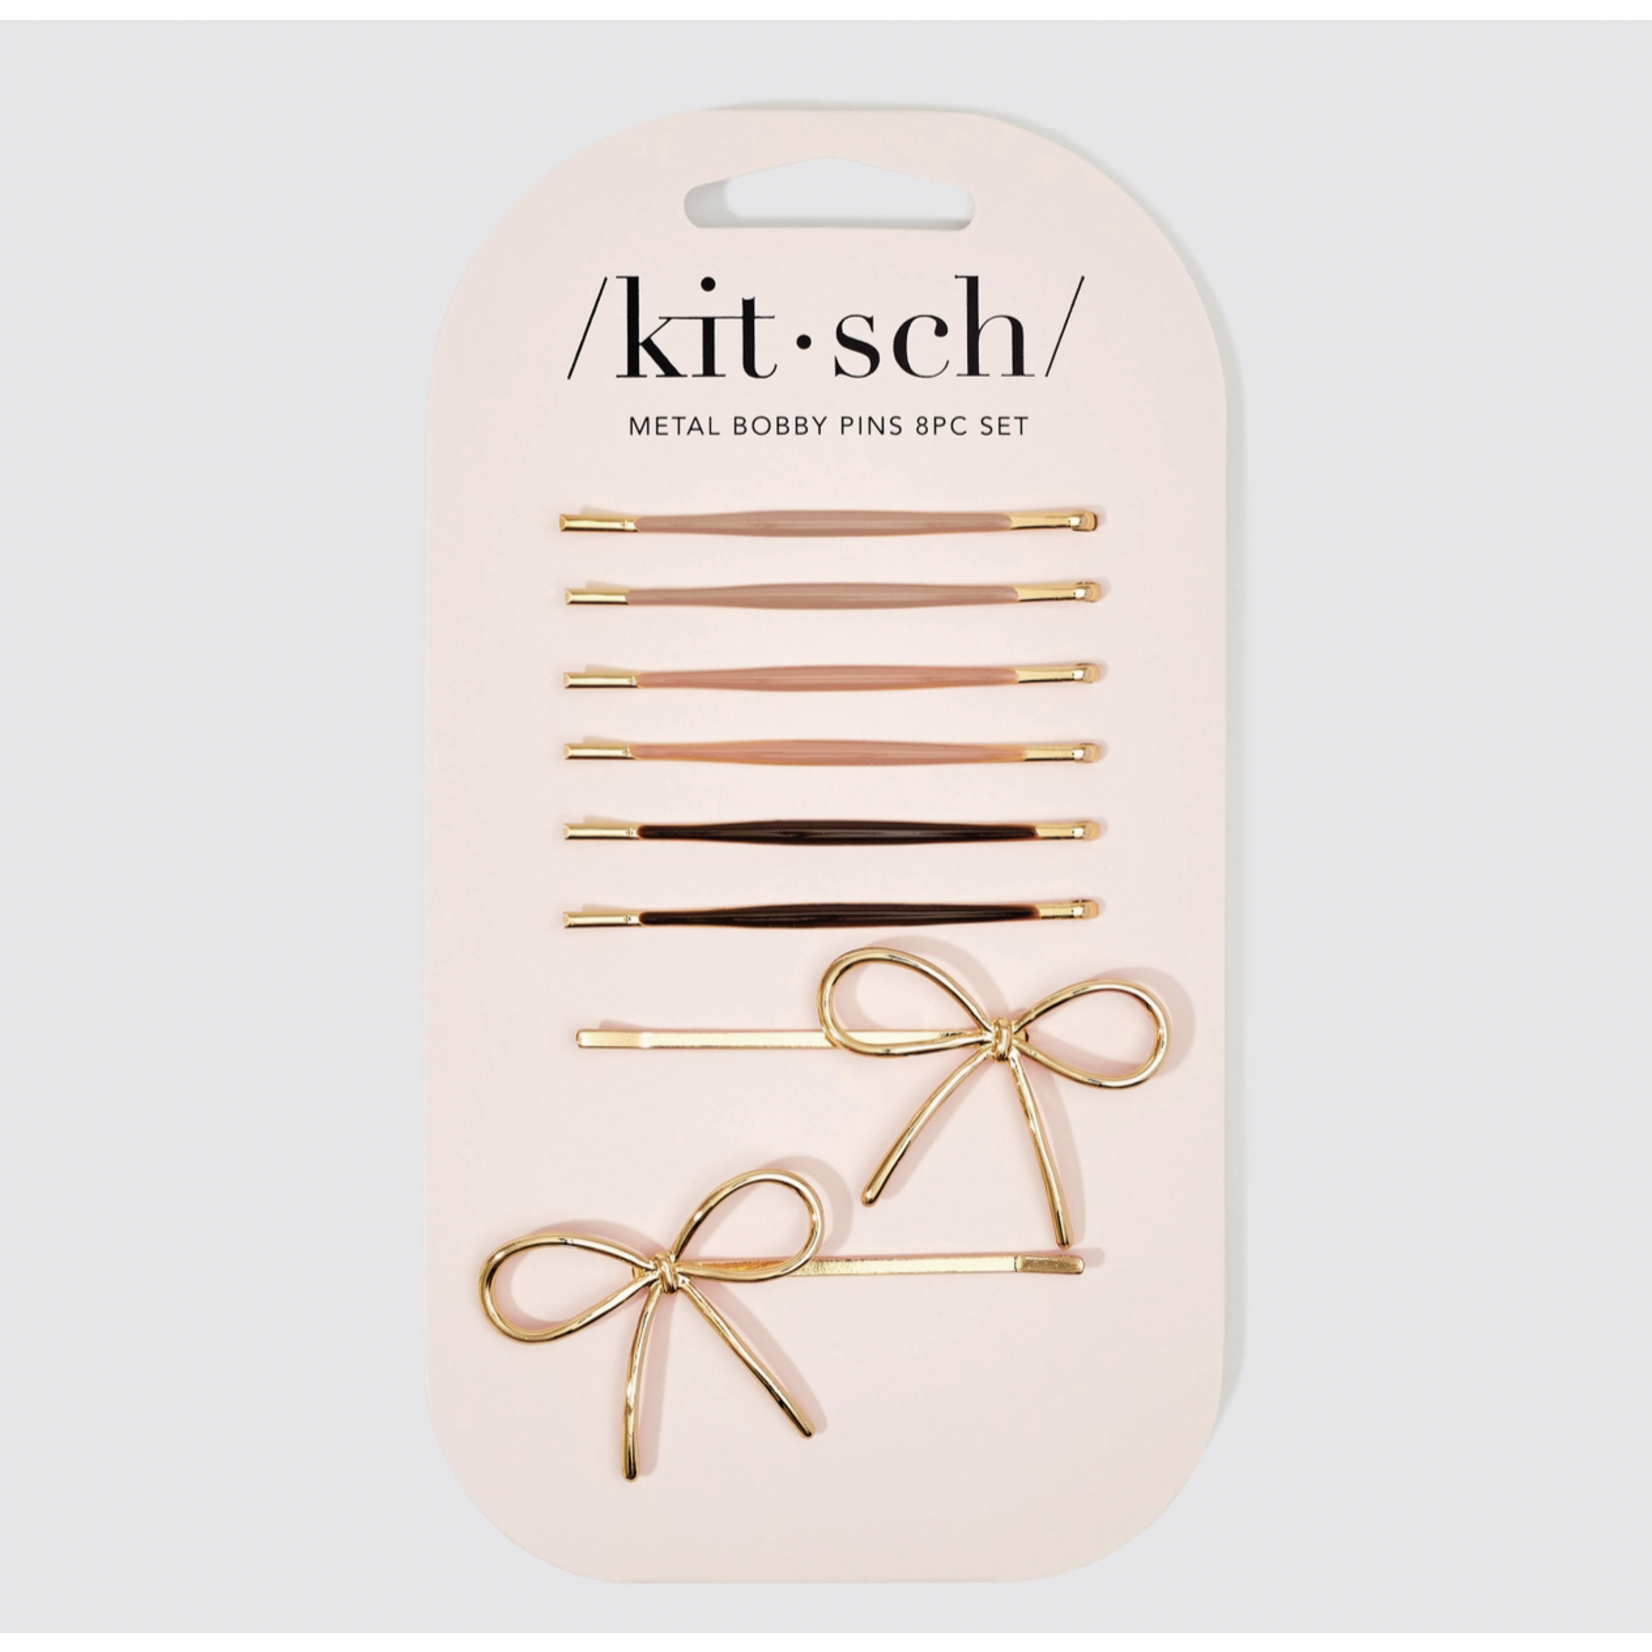 Kitsch Cloud & Bow Bobby Pins 8pc Set - Rosewood